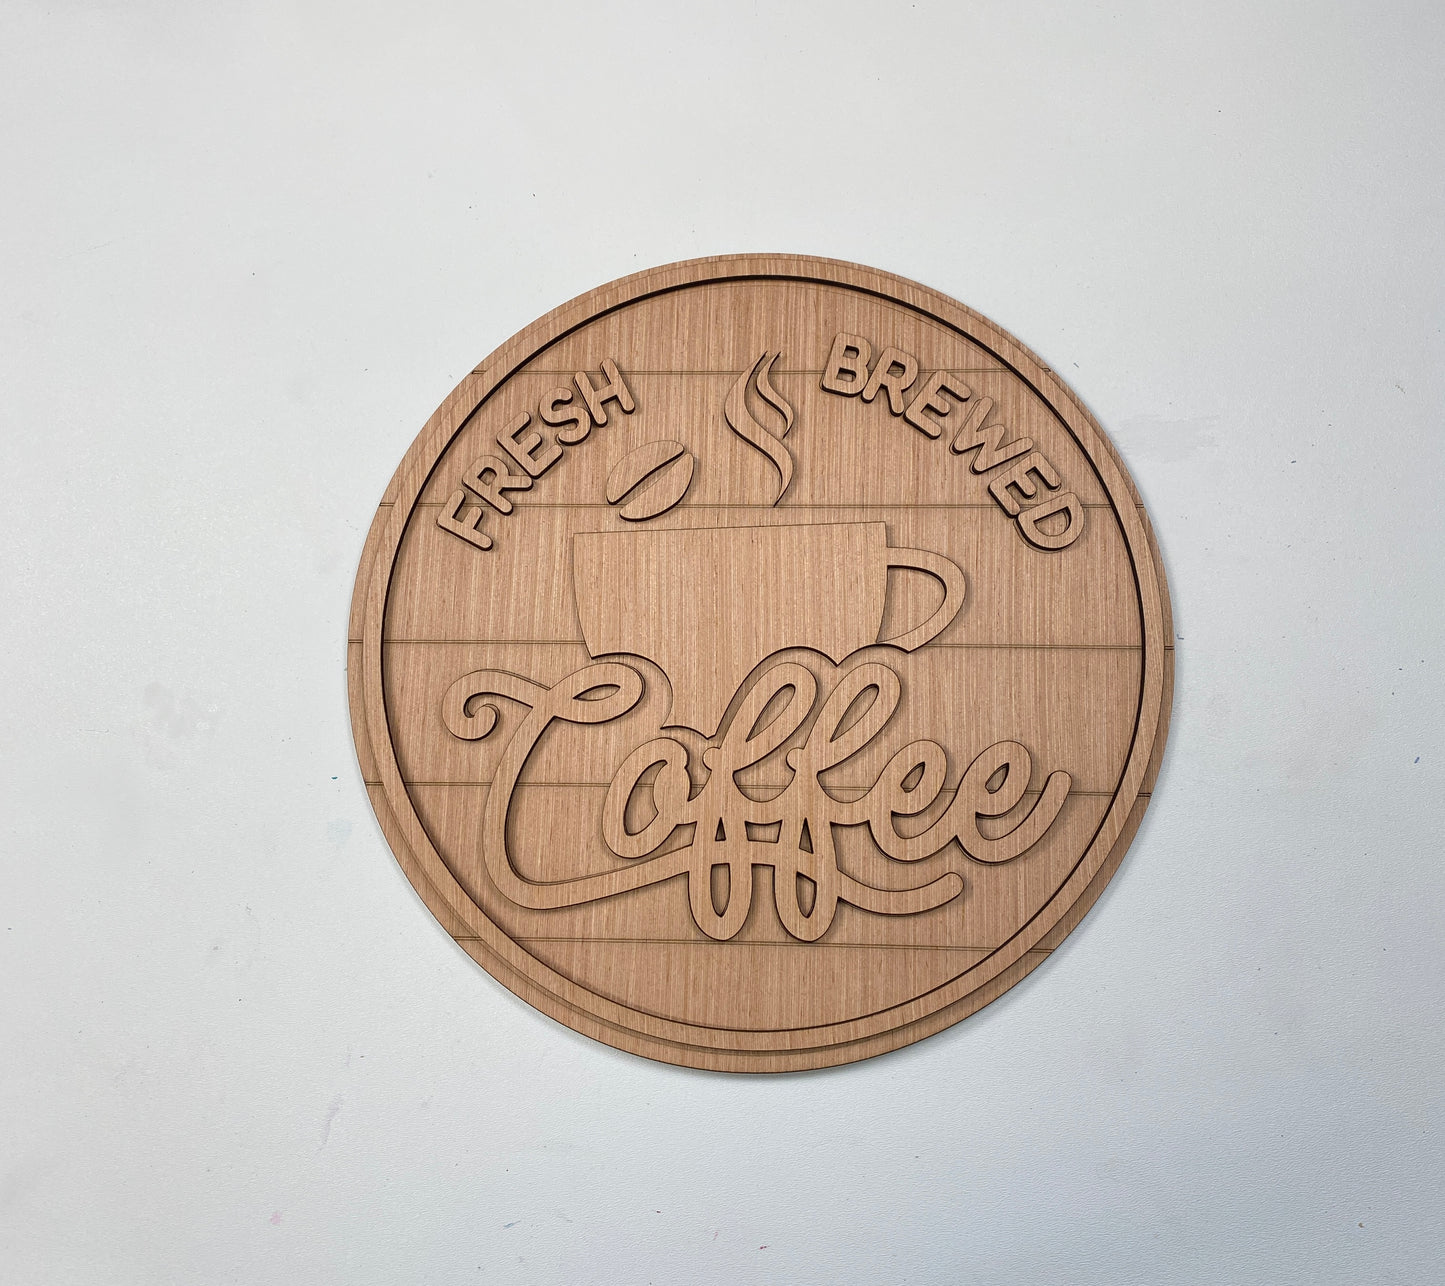 Freshed Brewed Coffee Door Hanger Laser Cut Blank for DIY Project